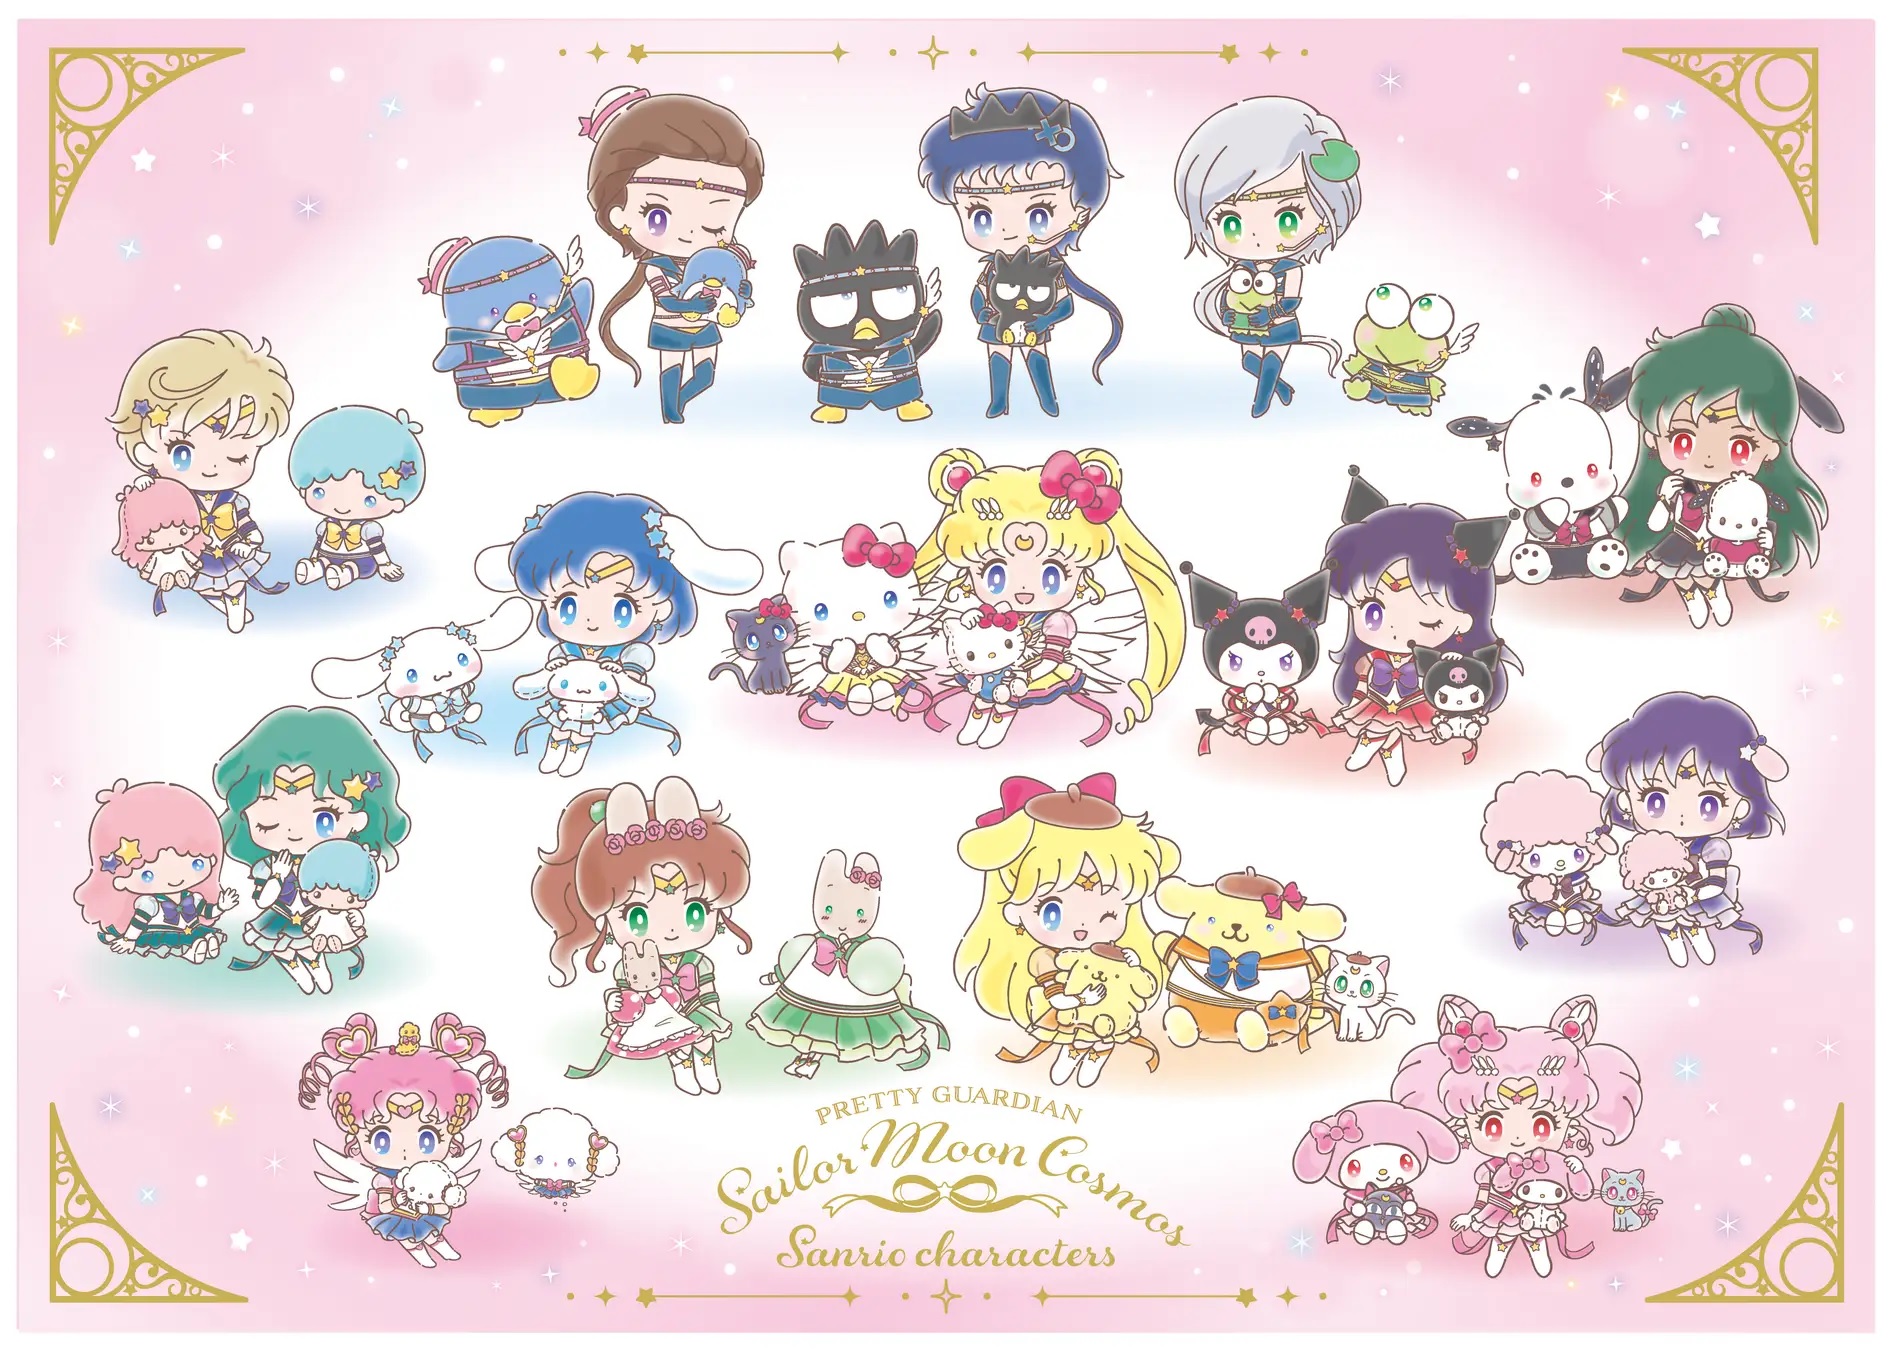 Sailor Moon Sanrio partnership adds pairings for Sailor Starlights in new  crossover merch line【Pics】